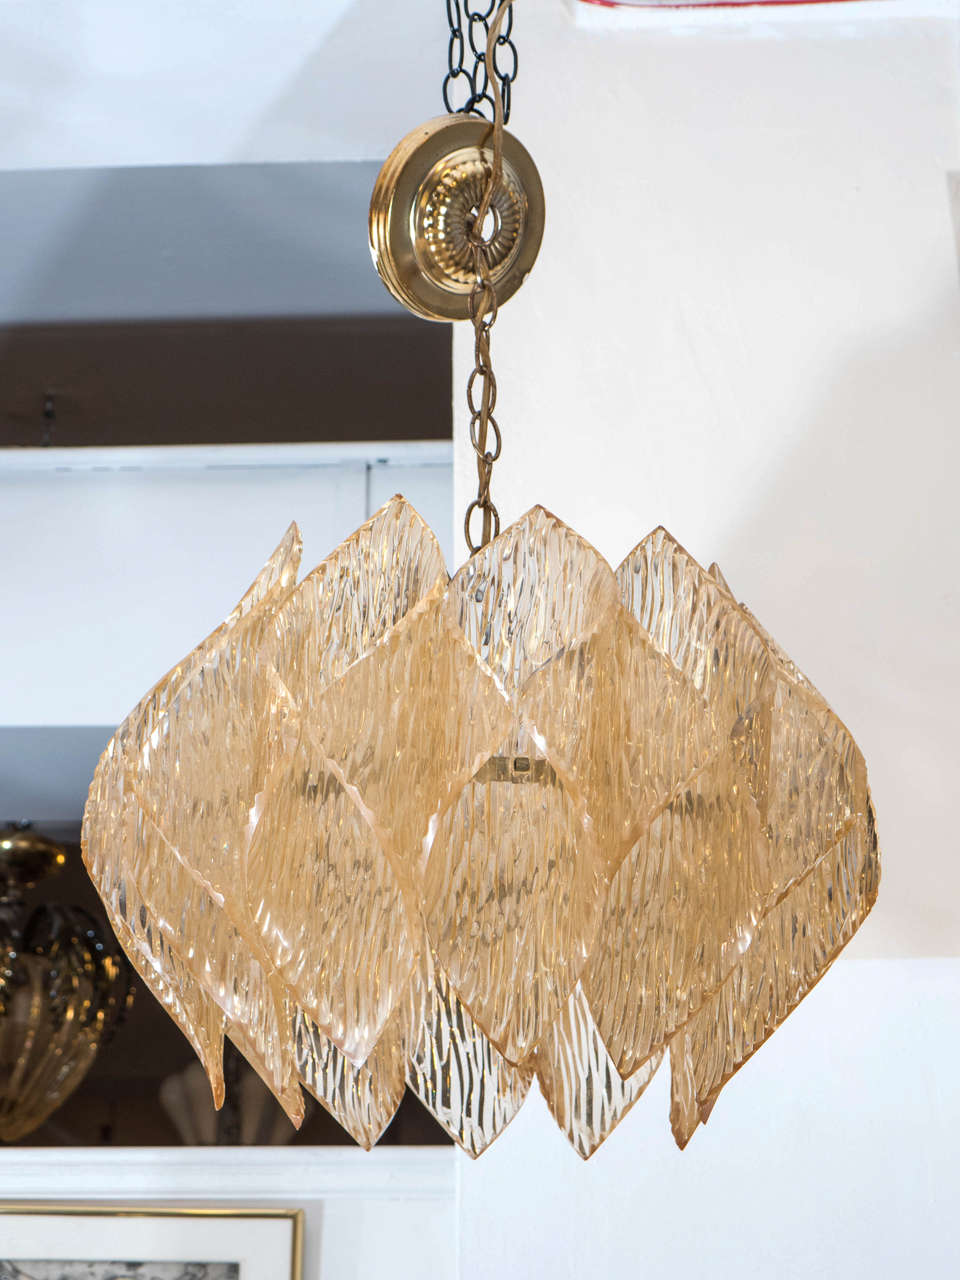 A vintage Kalmar style chandelier on a metal frame with a shade made of folded amber colored acrylic. Good vintage condition with age appropriate wear and patina.